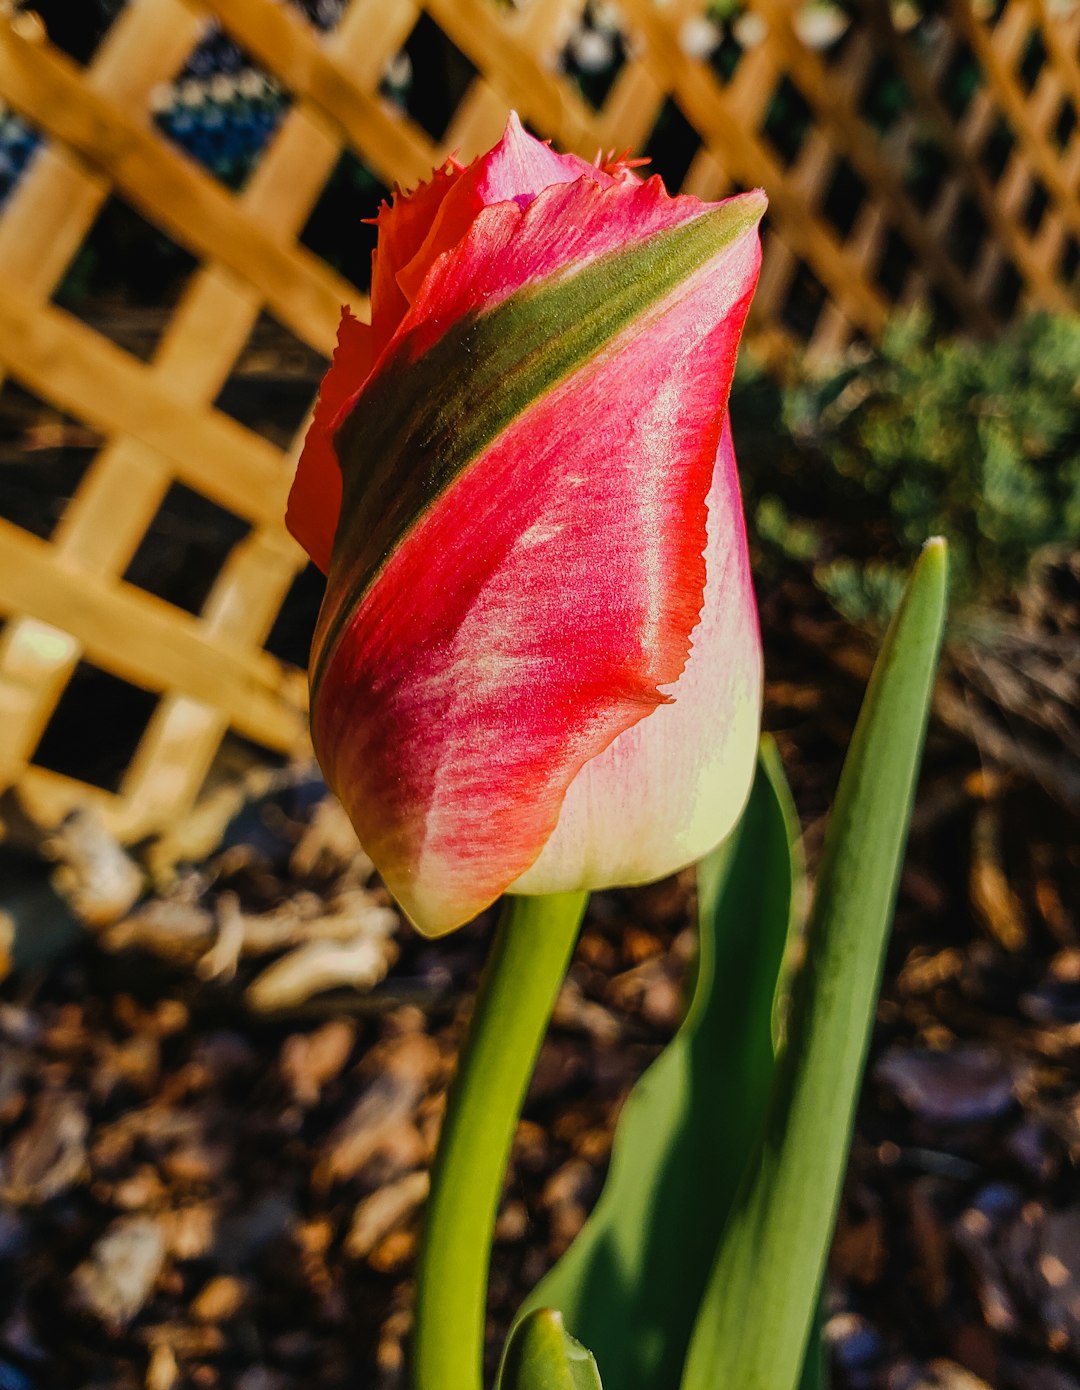 red and yellow tulip in bloom during daytime